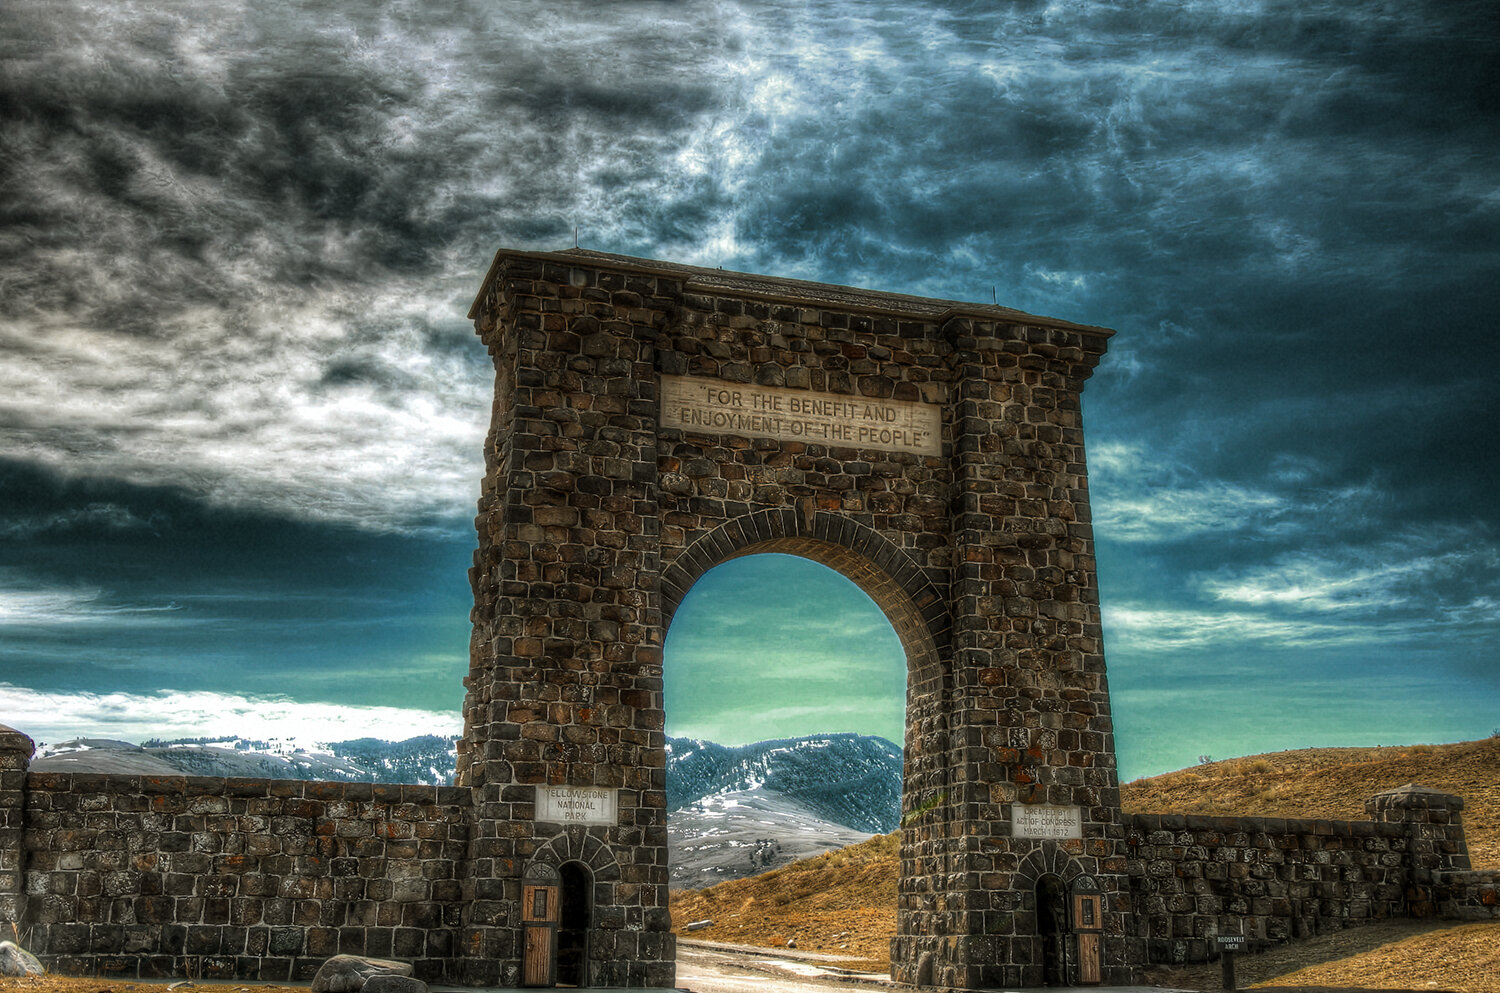 Roosevelt Arch in Yellowstone